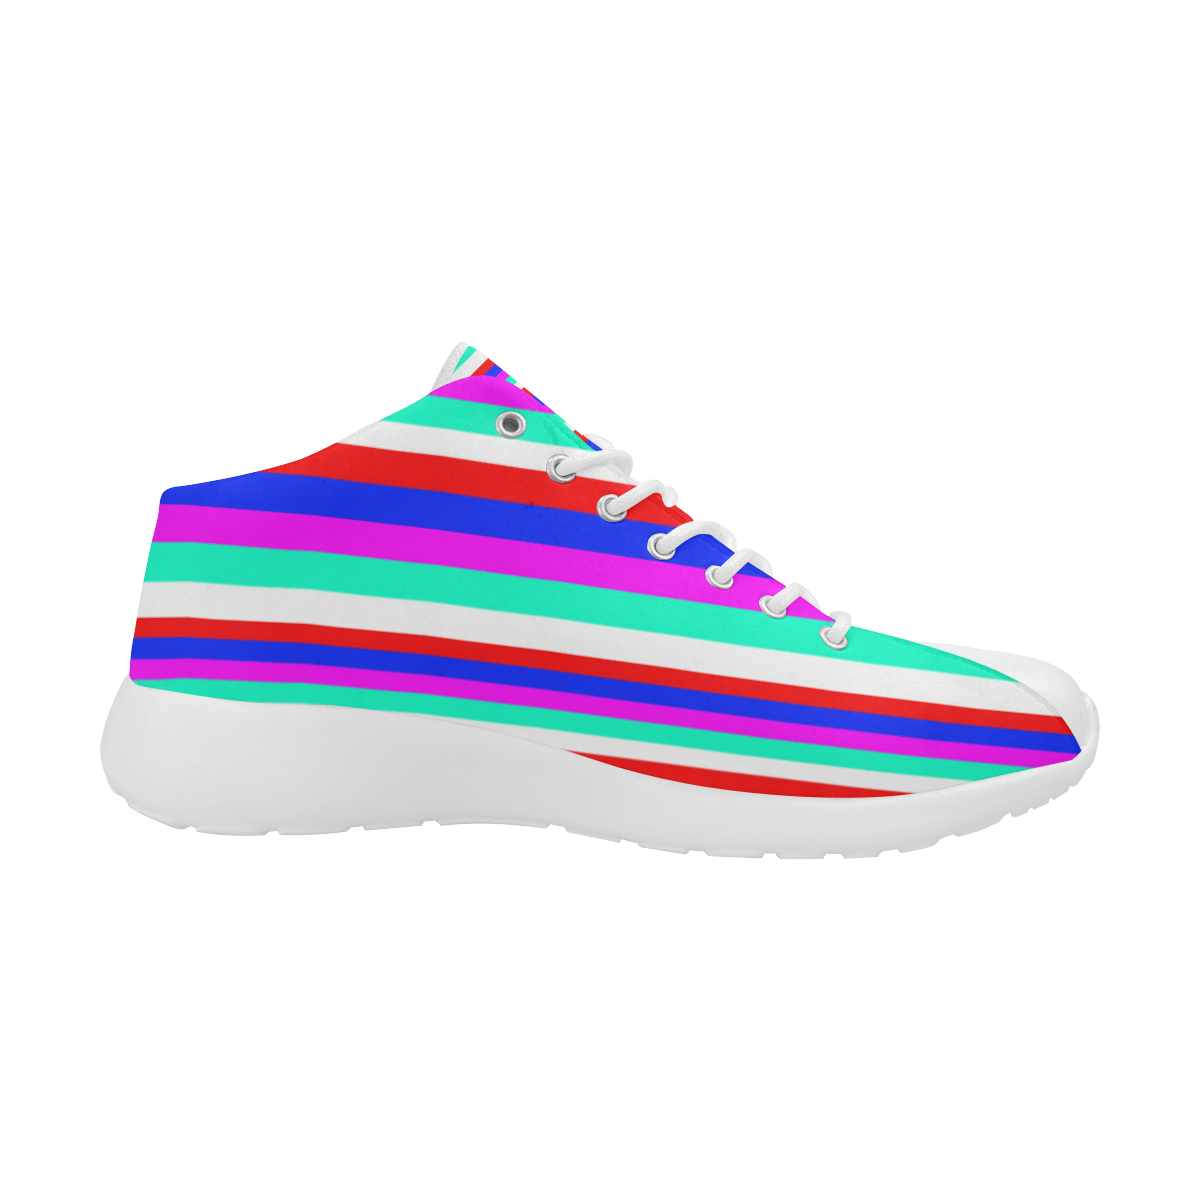 Colored Stripes - Fire Red Royal Blue Pink Mint Wh Men's Basketball Training Shoes (Model 47502)